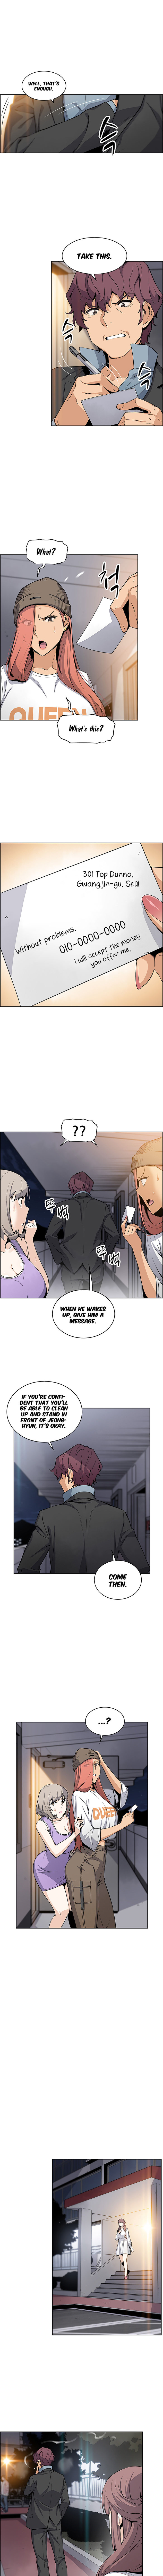 Housekeeper Manhwa - Chapter 39 Page 3